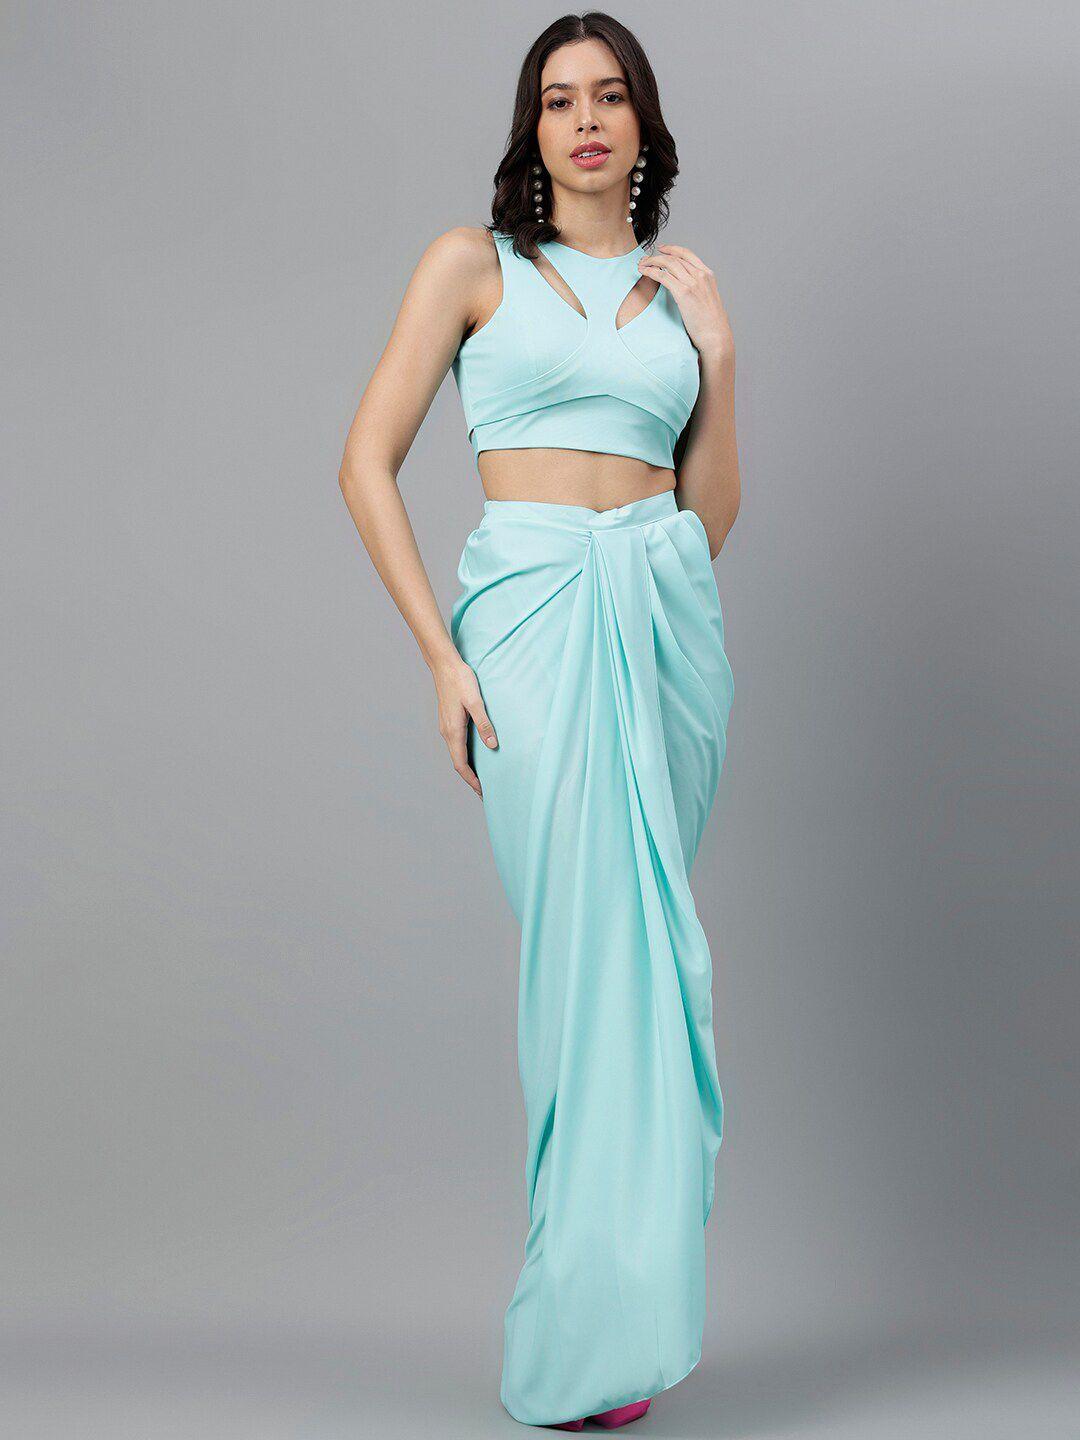 trymisfit sleeveless crop top with pleated skirt co-ords